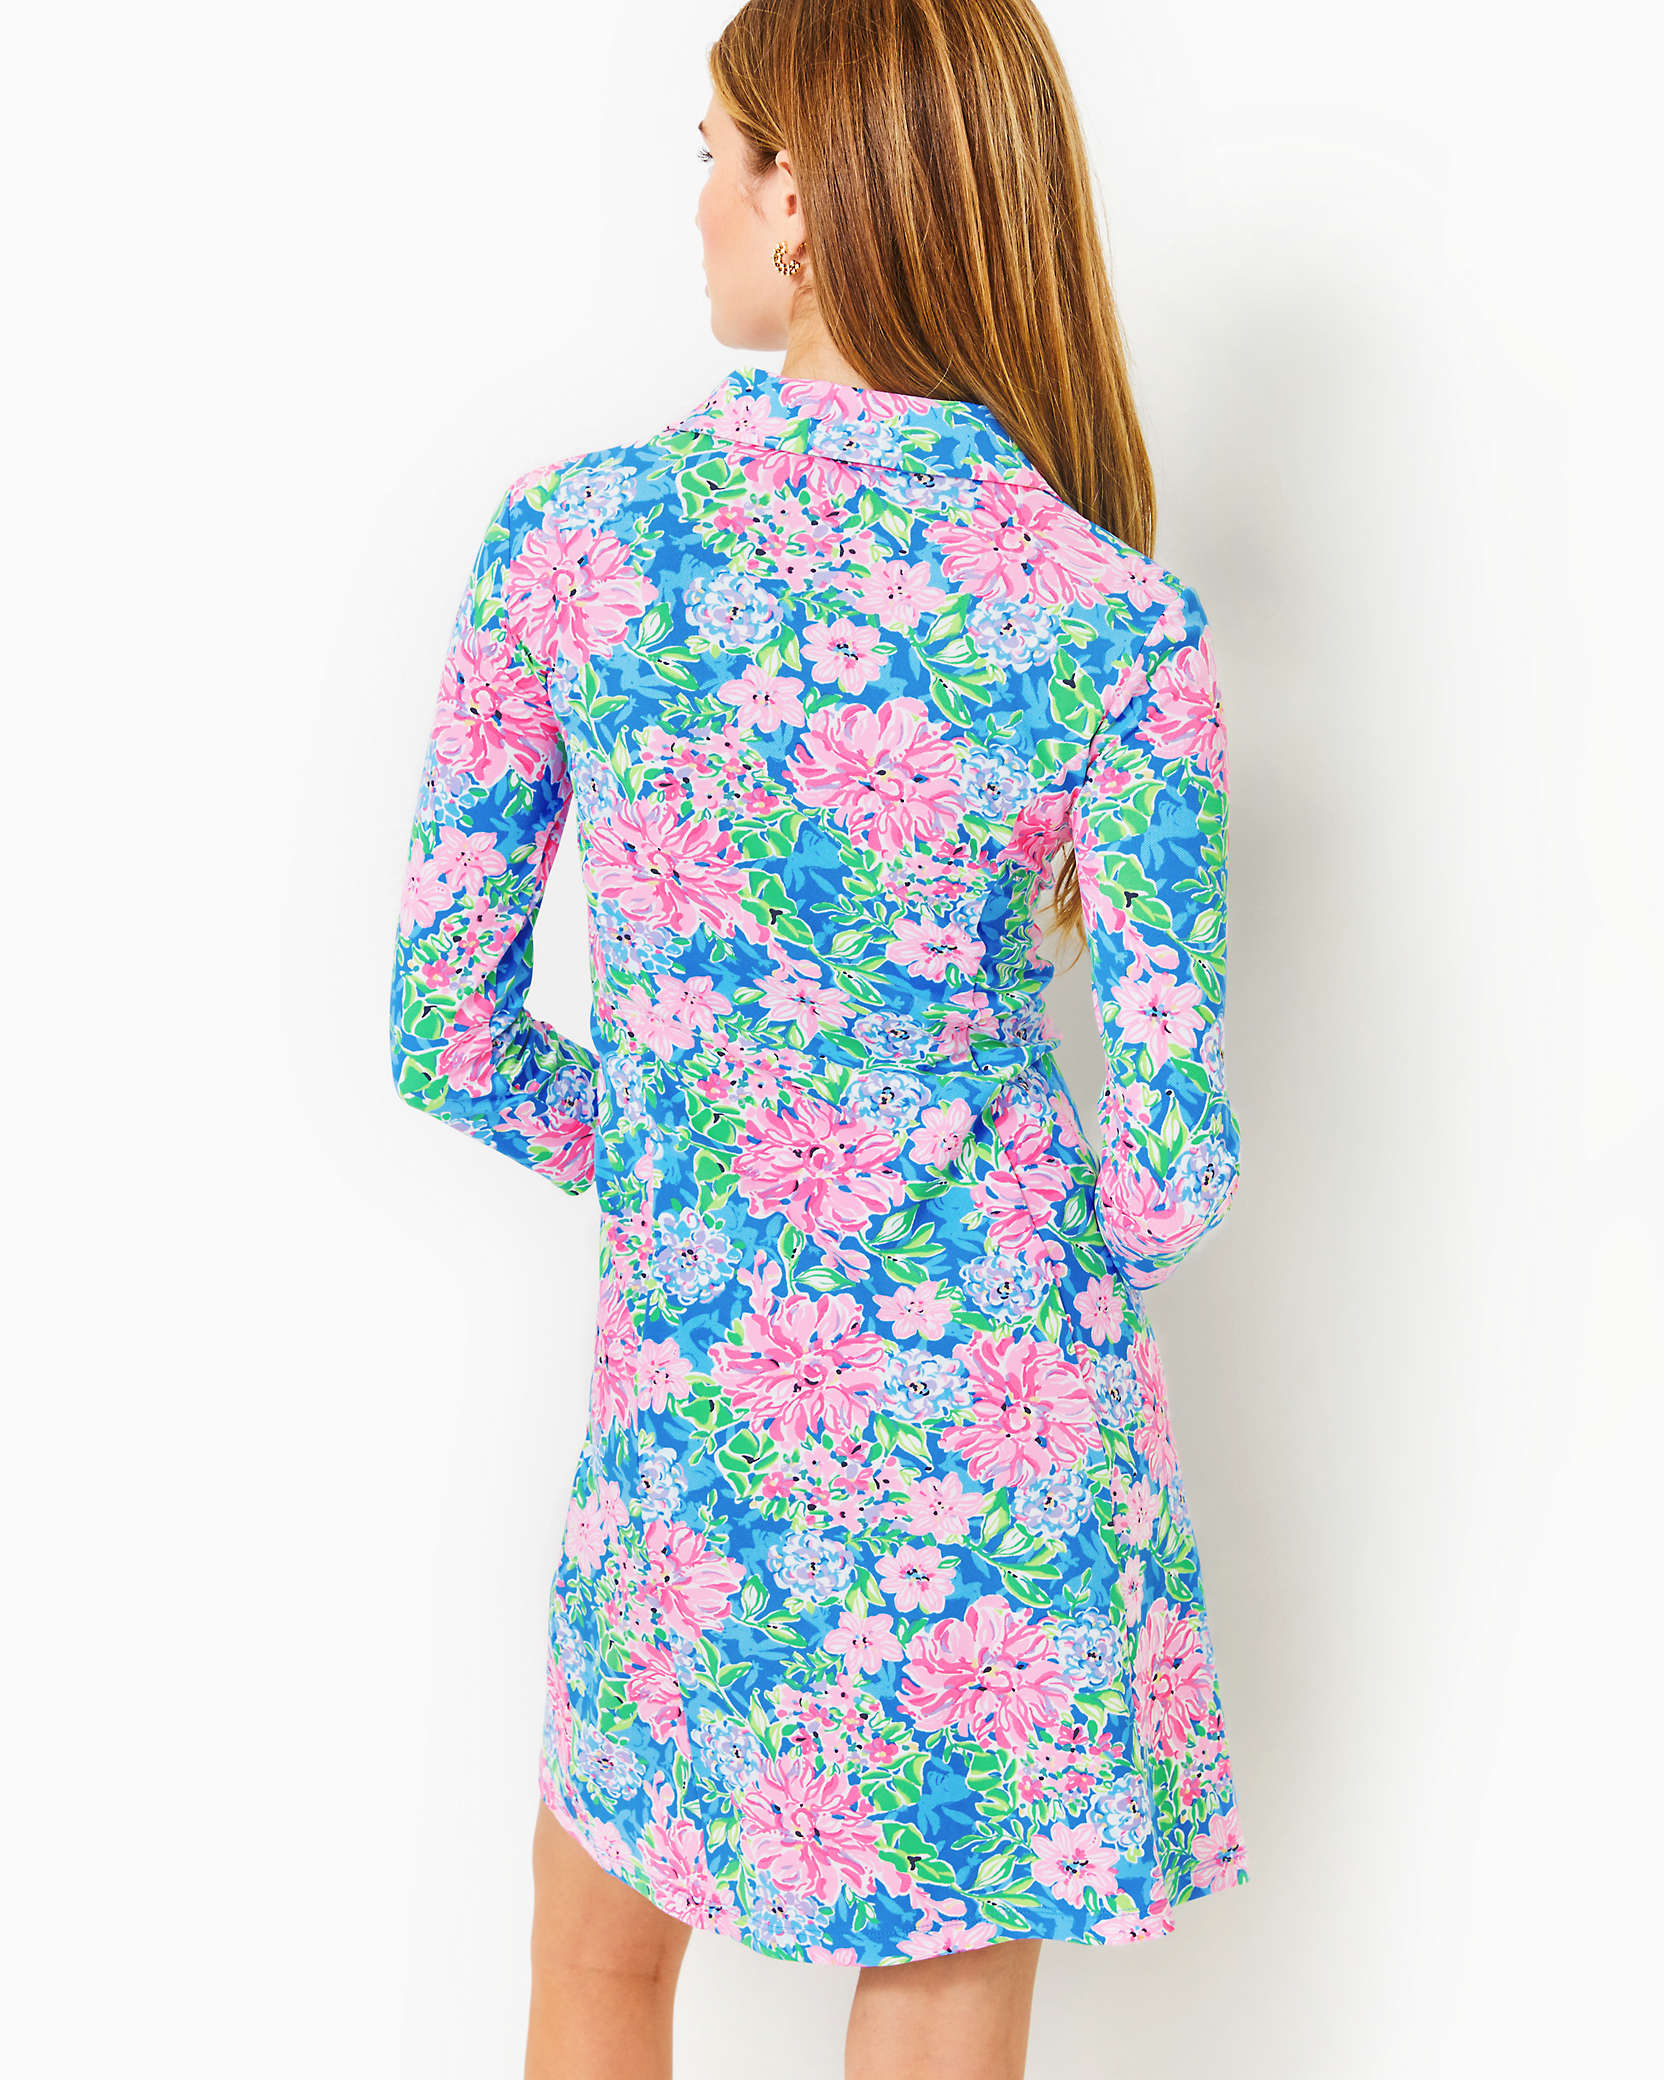 Shop Lilly Pulitzer Upf 50+ Luxletic Silvia Dress In Multi Spring In Your Step